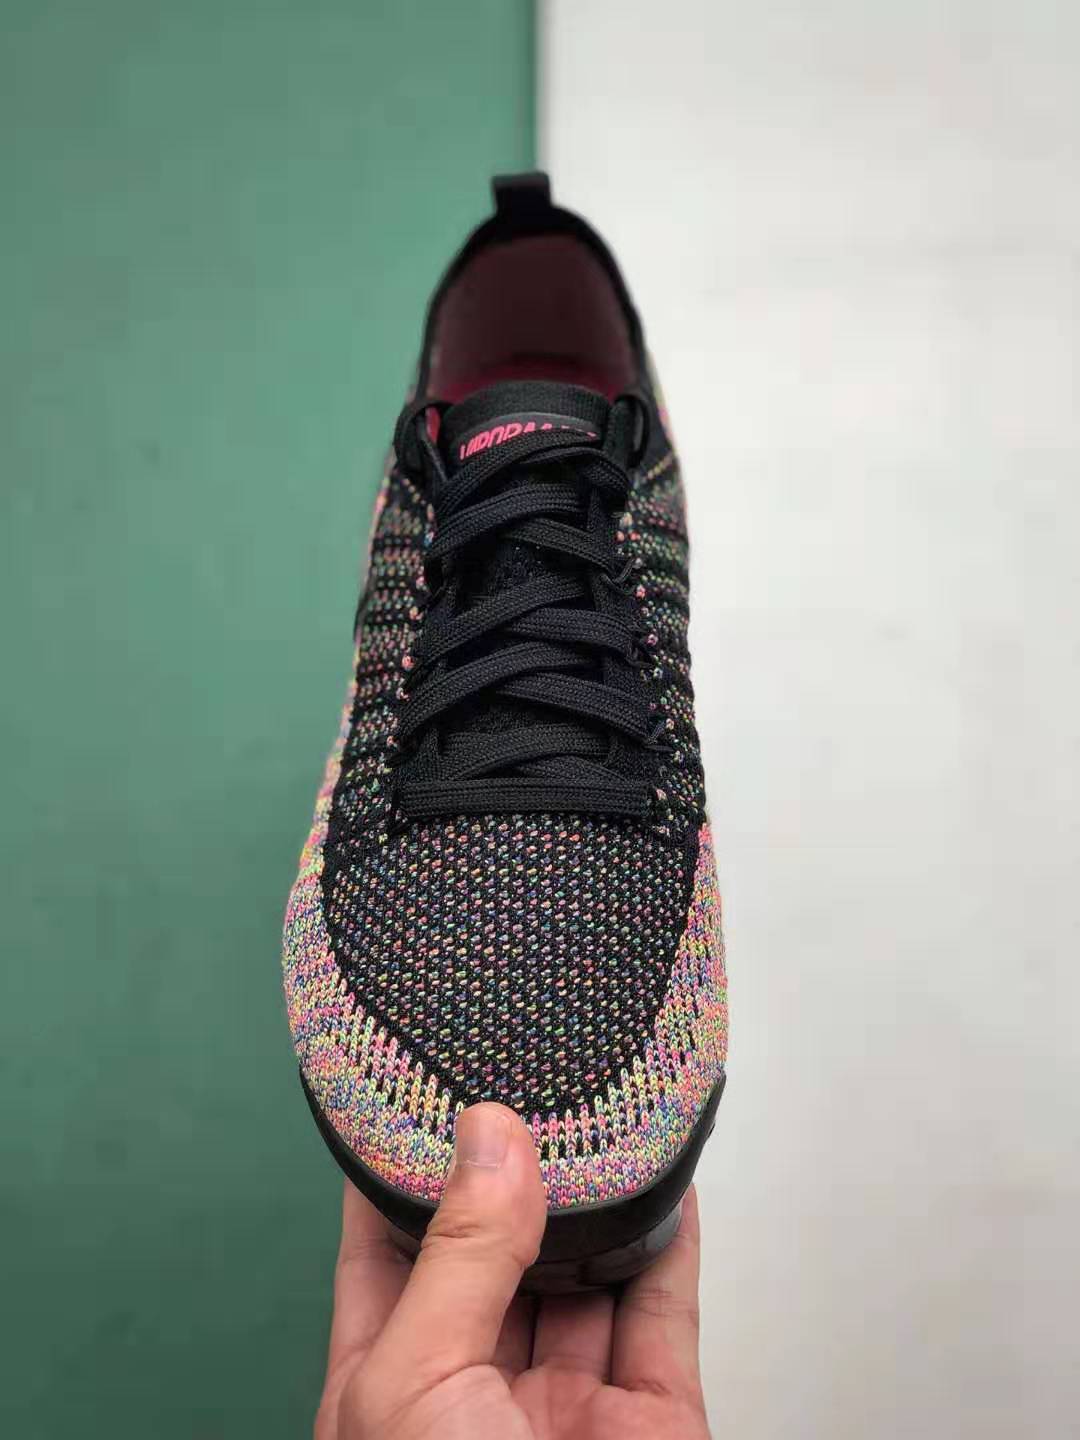 Nike Air VaporMax Flyknit 2 'Black Multi-Color' 942842-017 - Stylish and Versatile Footwear for Unmatched Comfort